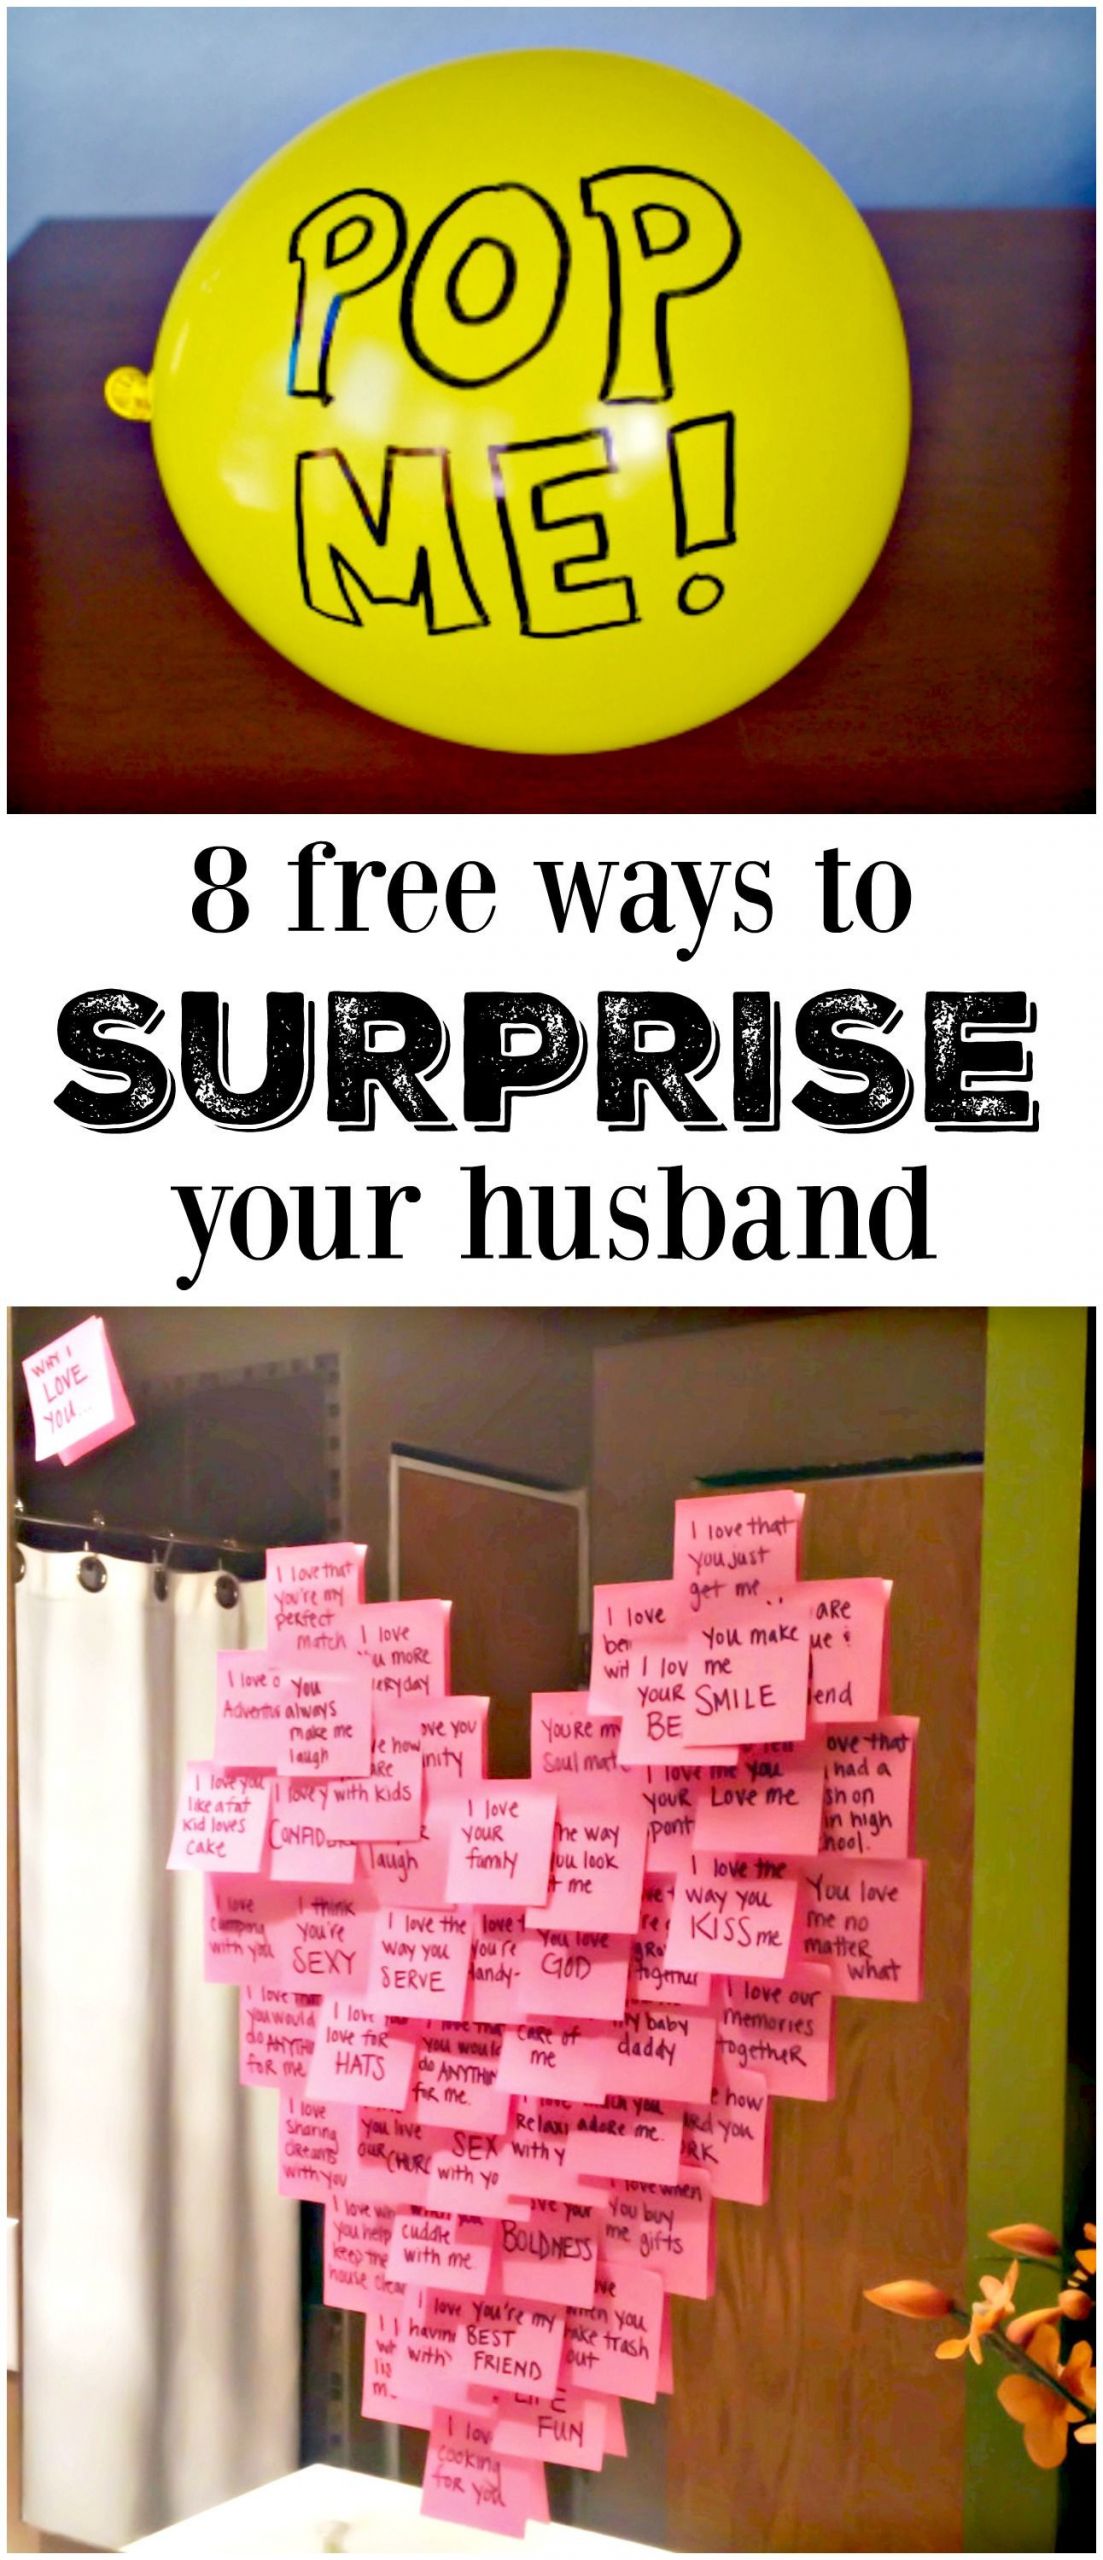 Good Birthday Gifts For Husband
 8 Meaningful Ways to Make His Day DIY Ideas